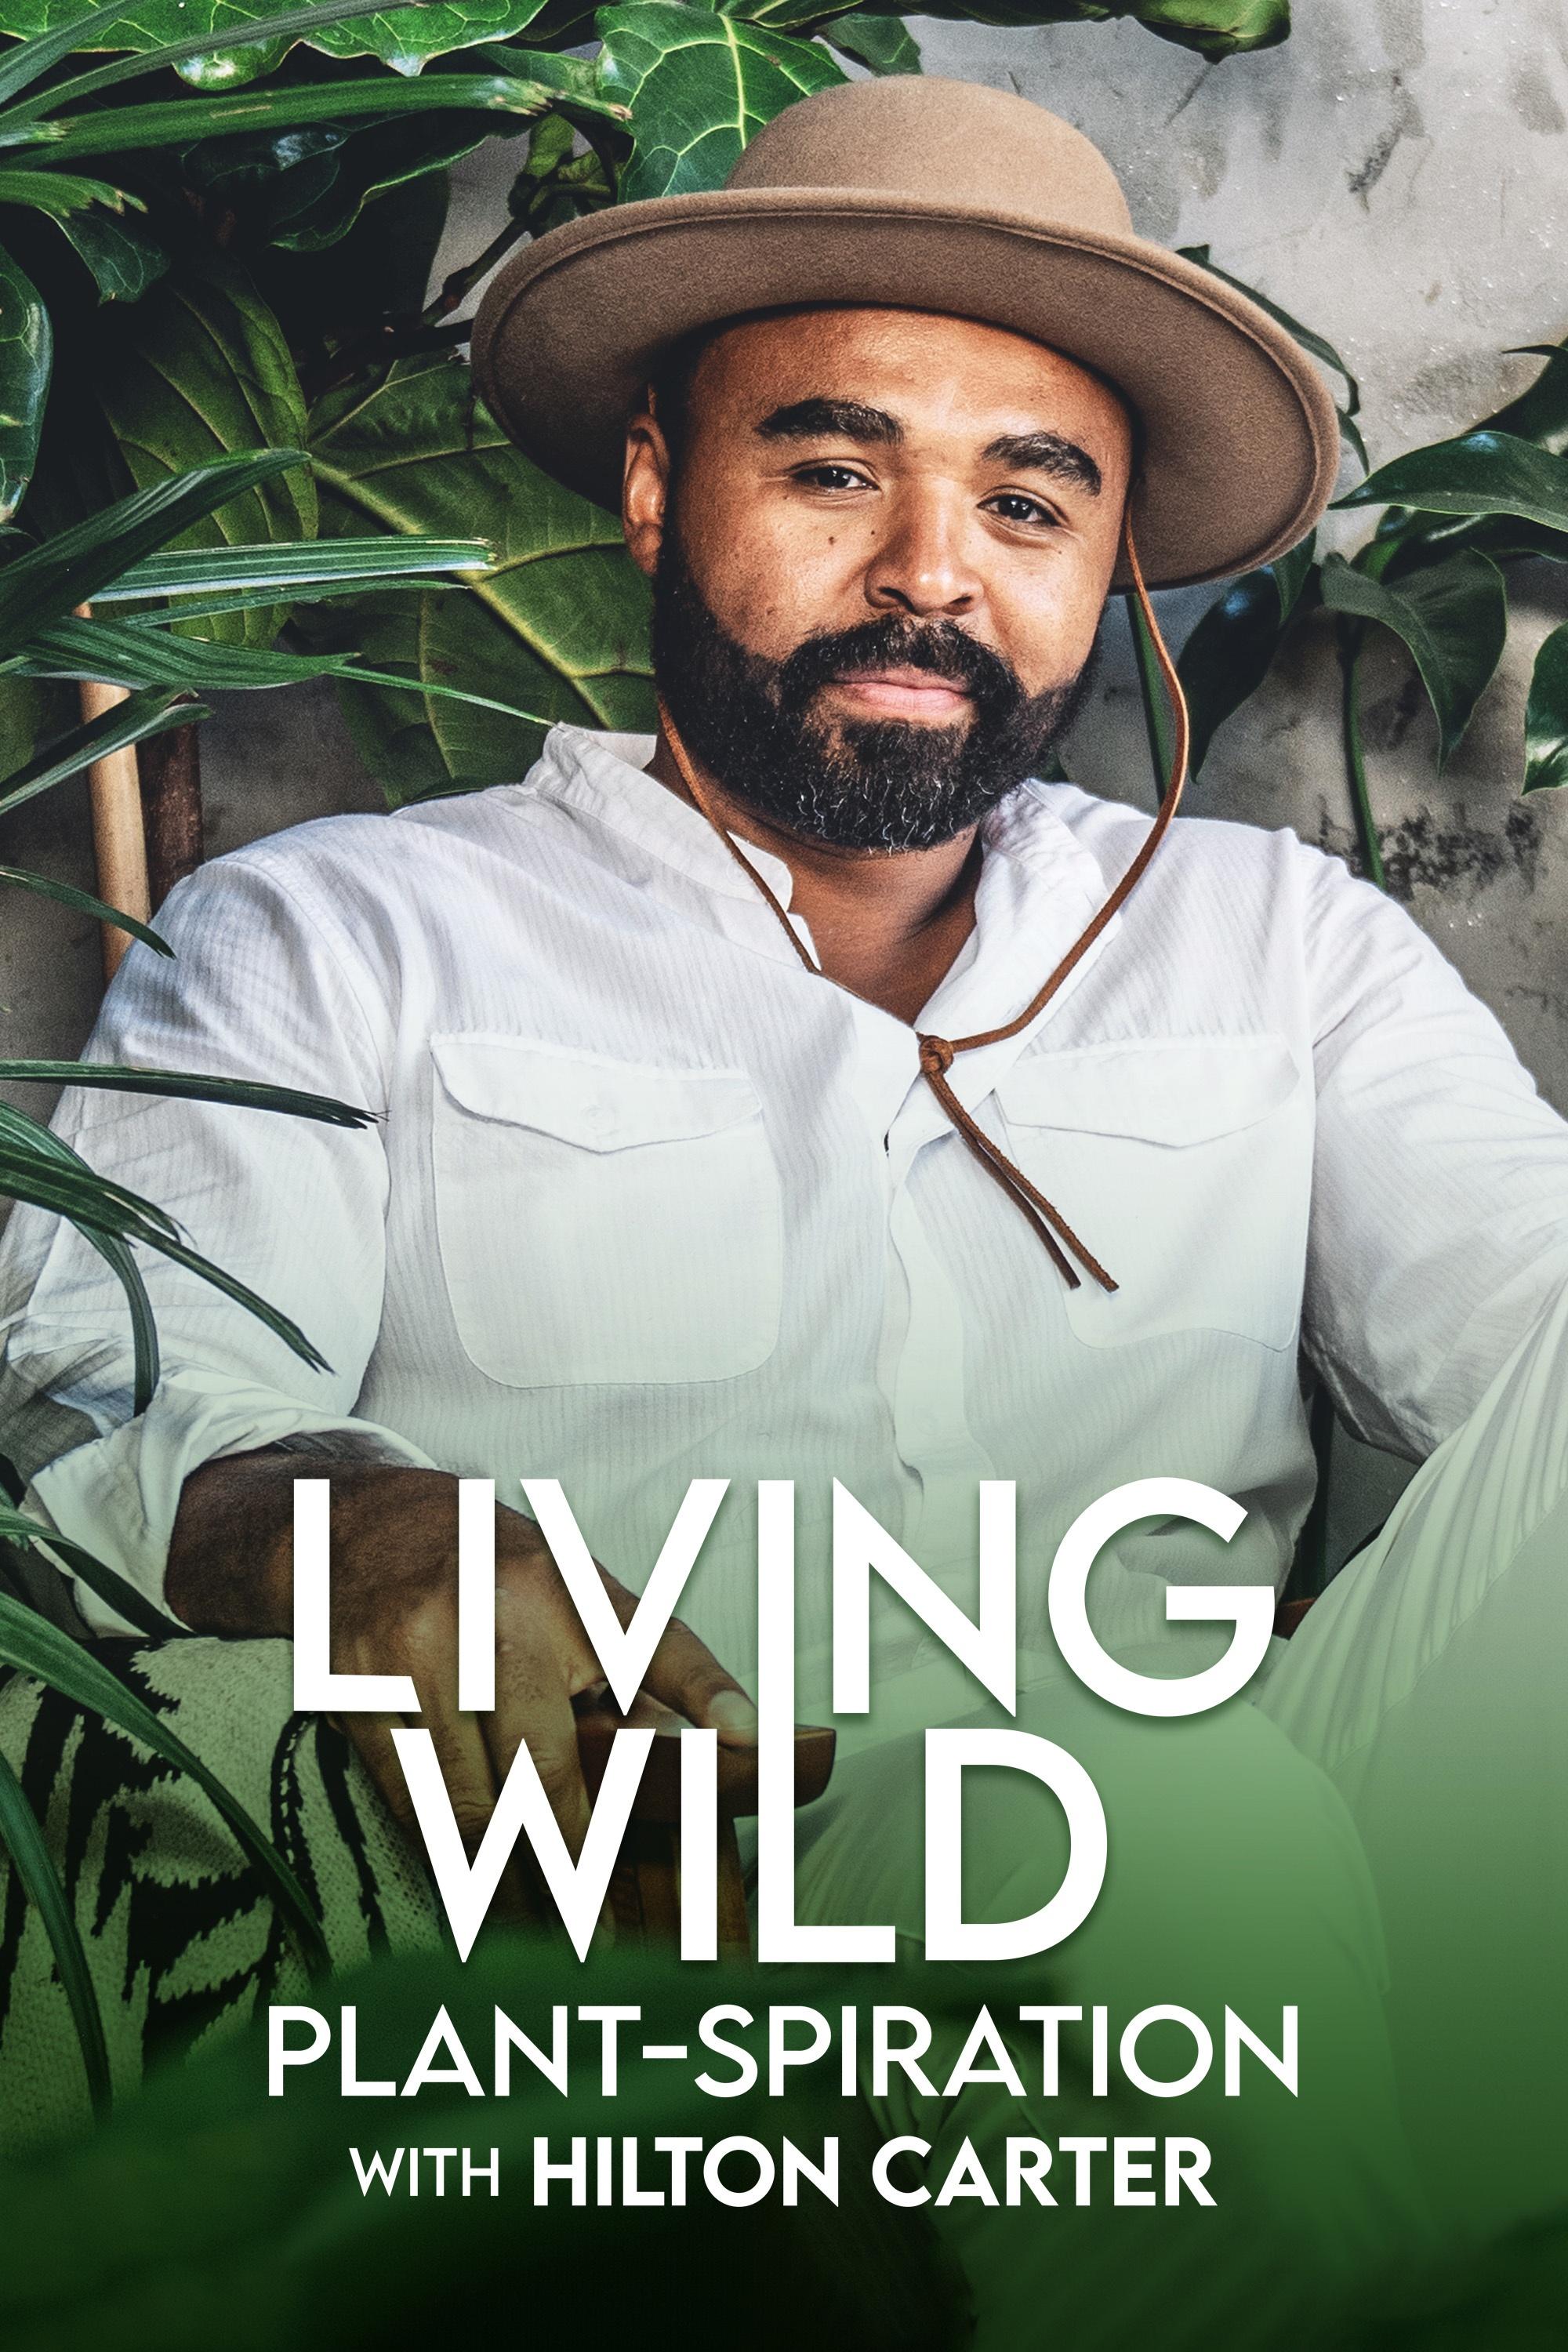 Living Wild: Plant-spiration with Hilton Carter